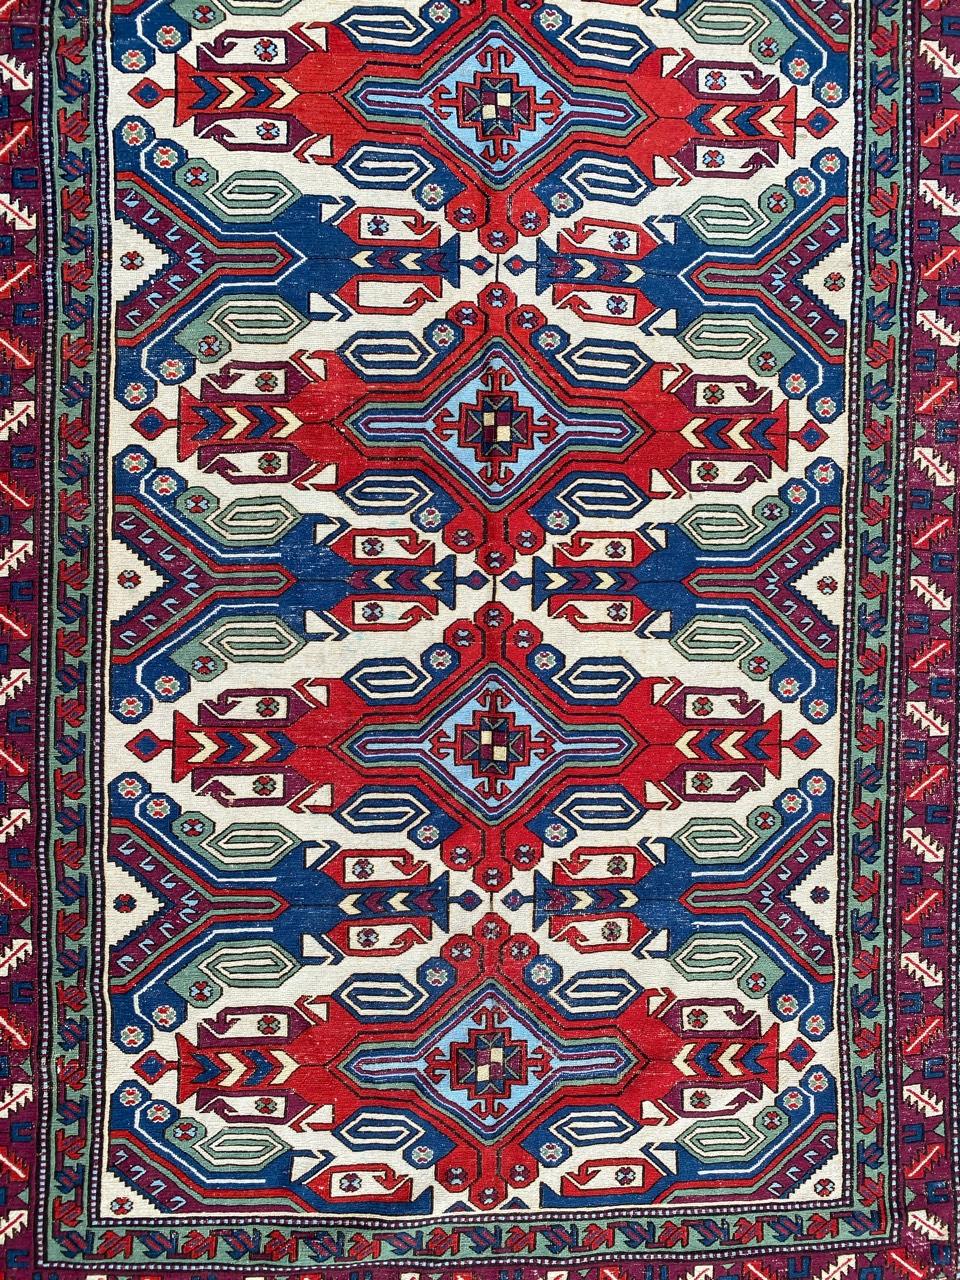 Very beautiful midcentury soumak rug with nice geometrical design and beautiful colors with red, yellow, blue and purple, entirely handwoven and embroidered with wool on wool foundation.

✨✨✨
